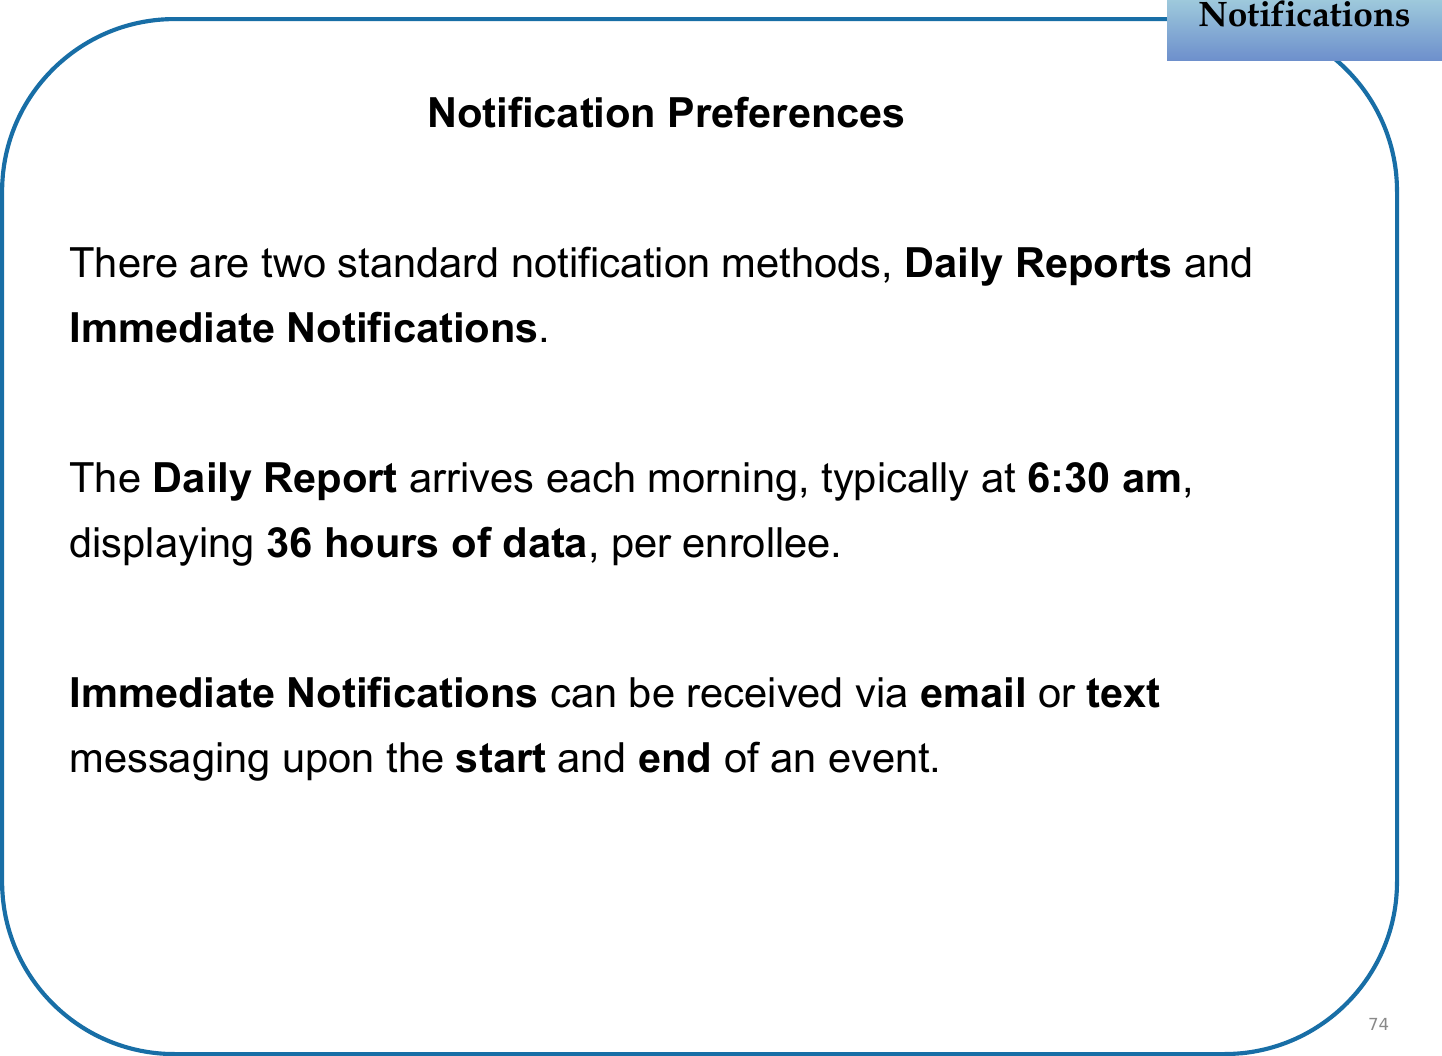 Notification PreferencesThere are two standard notification methods, Daily Reports and Immediate Notifications.The Daily Report arrives each morning, typically at 6:30 am, displaying 36 hours of data, per enrollee. Immediate Notifications can be received via email or text messaging upon the start and end of an event.NotificationsNotifications74